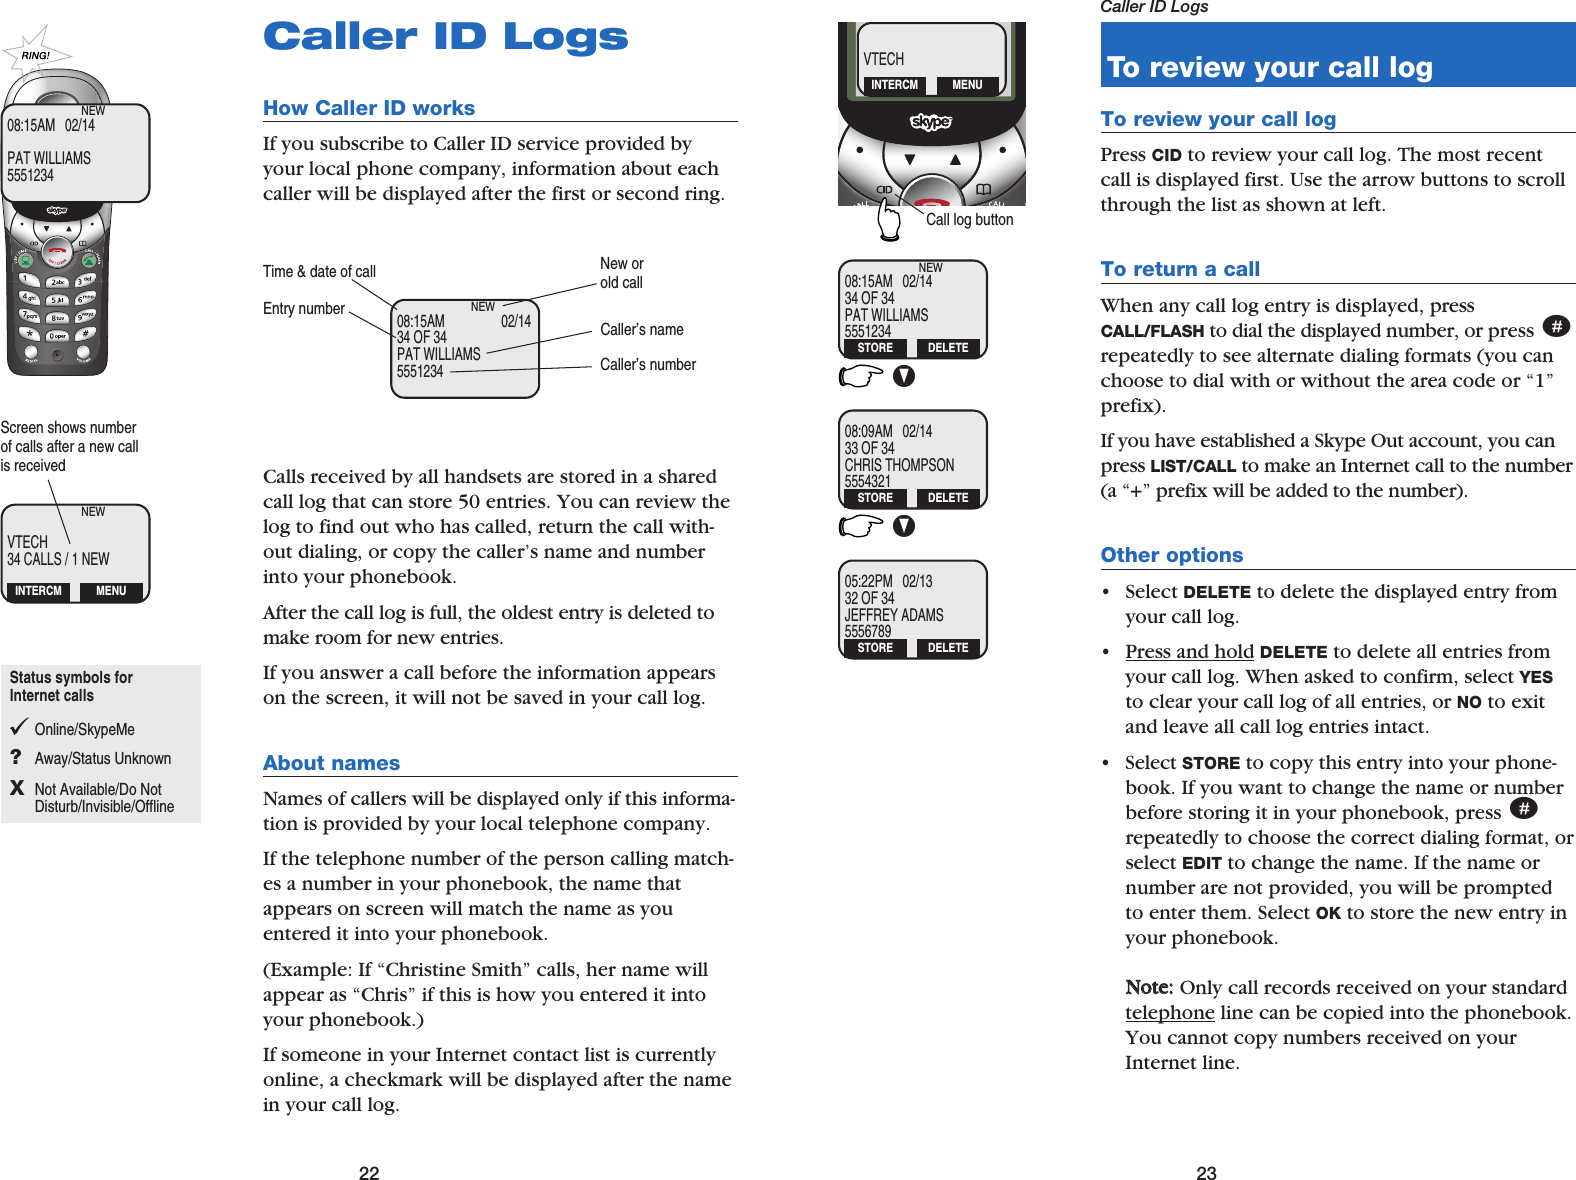 22 23Caller ID LogsCaller ID LogsHow Caller ID works If you subscribe to Caller ID service provided byyour local phone company, information about eachcaller will be displayed after the first or second ring.Calls received by all handsets are stored in a sharedcall log that can store 50 entries. You can review thelog to find out who has called, return the call with-out dialing, or copy the caller’s name and numberinto your phonebook.After the call log is full, the oldest entry is deleted tomake room for new entries.If you answer a call before the information appearson the screen, it will not be saved in your call log.About names Names of callers will be displayed only if this informa-tion is provided by your local telephone company. If the telephone number of the person calling match-es a number in your phonebook, the name thatappears on screen will match the name as youentered it into your phonebook. (Example: If “Christine Smith” calls, her name willappear as “Chris” if this is how you entered it intoyour phonebook.)If someone in your Internet contact list is currentlyonline, a checkmark will be displayed after the namein your call log.08:15AM                 02/1434 OF 34PAT WILLIAMS5551234NEWTime &amp; date of callCaller’s numberNew orold callCaller’s nameEntry number08:15AM   02/14PAT WILLIAMS5551234NEWVTECH34 CALLS / 1 NEWNEWINTERCM MENUScreen shows numberof calls after a new callis receivedTo review your call logTo review your call logPress CID to review your call log. The most recentcall is displayed first. Use the arrow buttons to scrollthrough the list as shown at left.To return a callWhen any call log entry is displayed, pressCALL/FLASH to dial the displayed number, or press #repeatedly to see alternate dialing formats (you canchoose to dial with or without the area code or “1”prefix).If you have established a Skype Out account, you canpress LIST/CALL to make an Internet call to the number(a “+” prefix will be added to the number).Other options• Select DELETE to delete the displayed entry fromyour call log.• Press and hold DELETE to delete all entries fromyour call log. When asked to confirm, select YESto clear your call log of all entries, or NO to exitand leave all call log entries intact.• Select STORE to copy this entry into your phone-book. If you want to change the name or numberbefore storing it in your phonebook, press #repeatedly to choose the correct dialing format, orselect EDIT to change the name. If the name ornumber are not provided, you will be promptedto enter them. Select OK to store the new entry inyour phonebook.NNoottee::Only call records received on your standardtelephone line can be copied into the phonebook.You cannot copy numbers received on yourInternet line.VV08:15AM   02/1434 OF 34PAT WILLIAMS5551234NEWSTORE DELETE08:09AM   02/1433 OF 34CHRIS THOMPSON5554321DELETE05:22PM   02/1332 OF 34JEFFREY ADAMS5556789STORE DELETEVTECHINTERCM MENUCall log buttonSTOREStatus symbols for Internet callsOnline/SkypeMe?Away/Status UnknownXNot Available/Do Not Disturb/Invisible/Offline